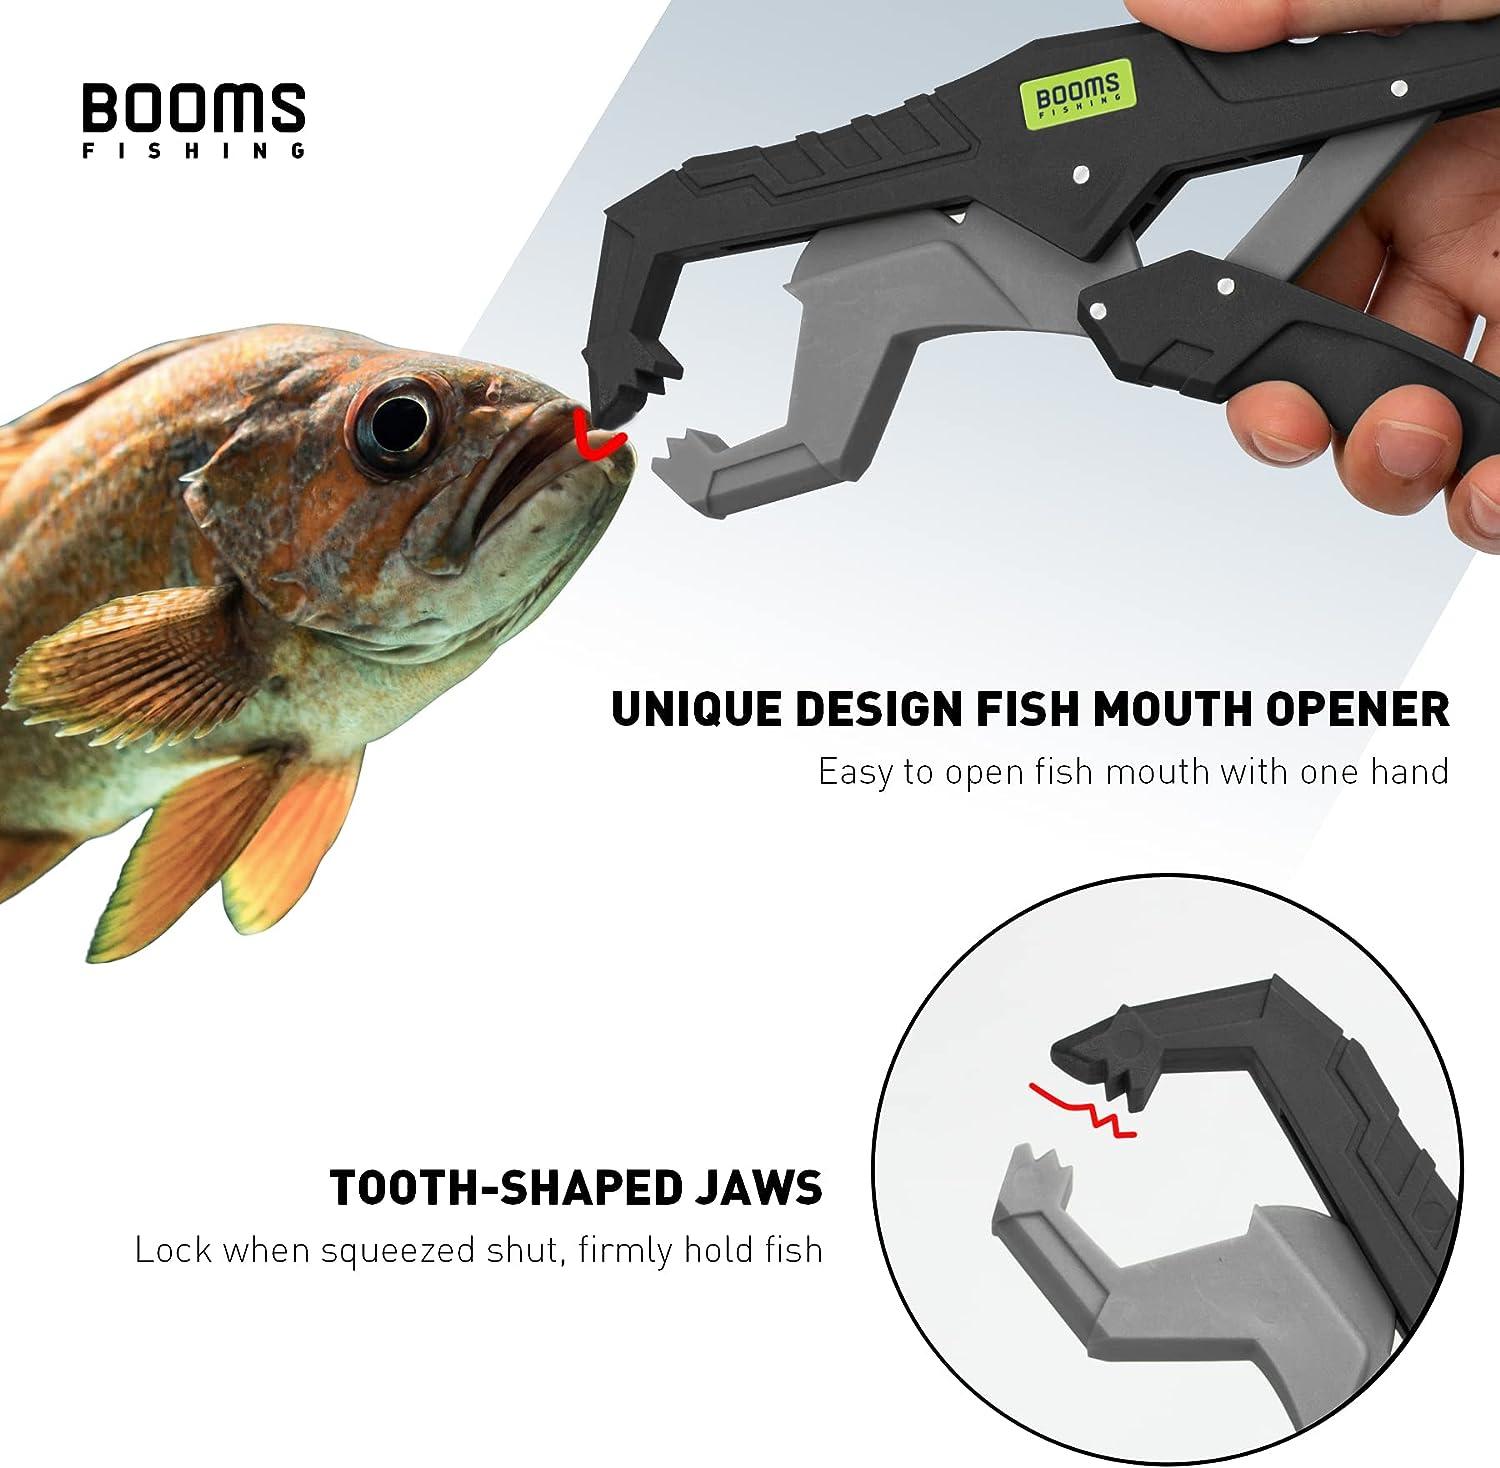 Booms Fishing G05 Fish Lip Gripper Saltwater, 9.4 Plastic Catfish Grippers  Pliers, Fish Grabber Tool with Lanyard, Fish Grips for Kayak Fishing  Accessories, Great Fish Holder for Caught Fish Black